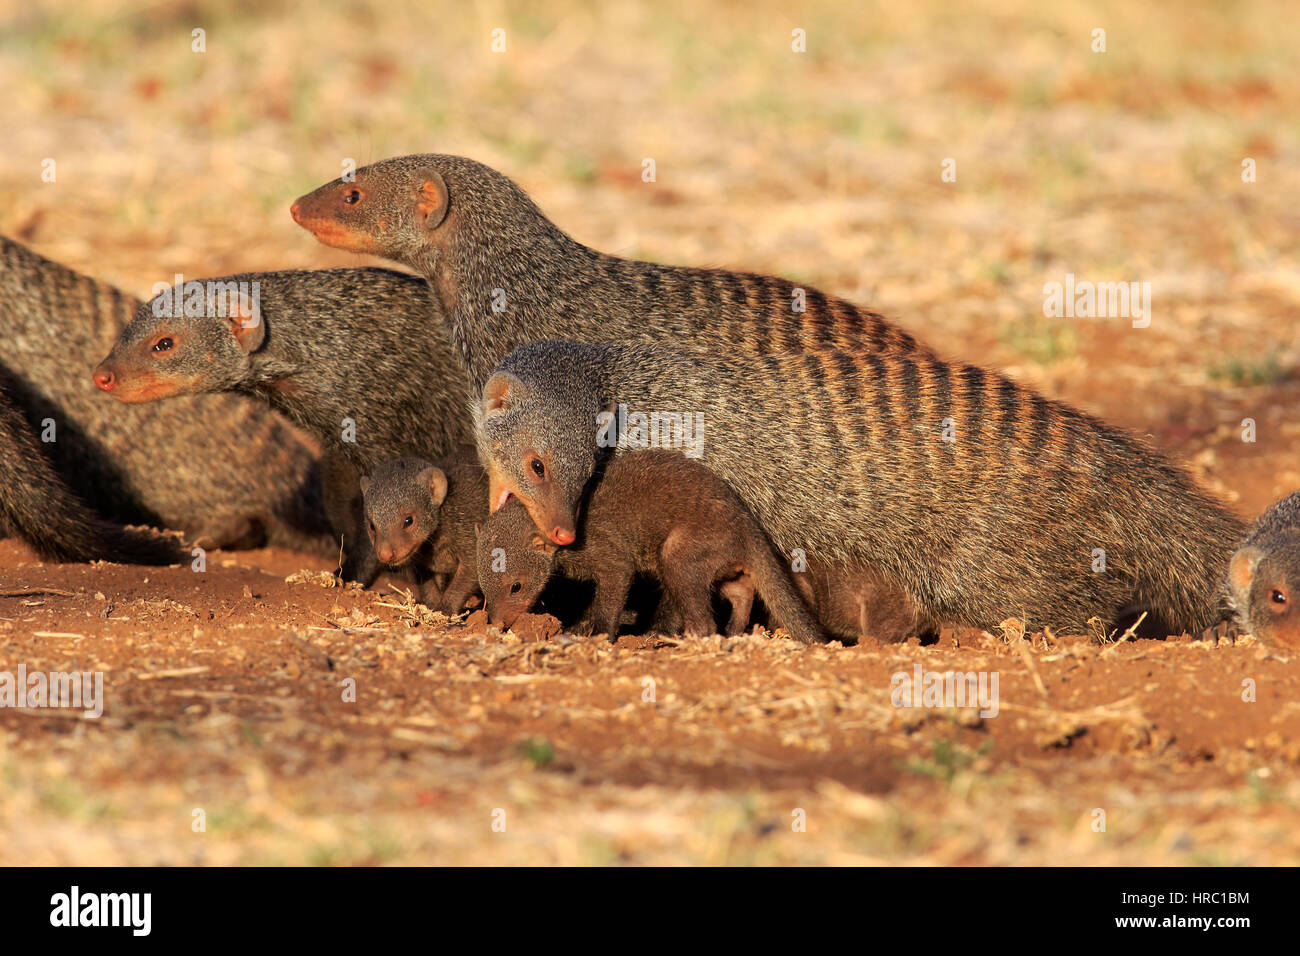 Banded mongoose, (Mungos mungo), mother with young bites to carry, neckbite, Kruger Nationalpark, South Africa, Africa Stock Photo